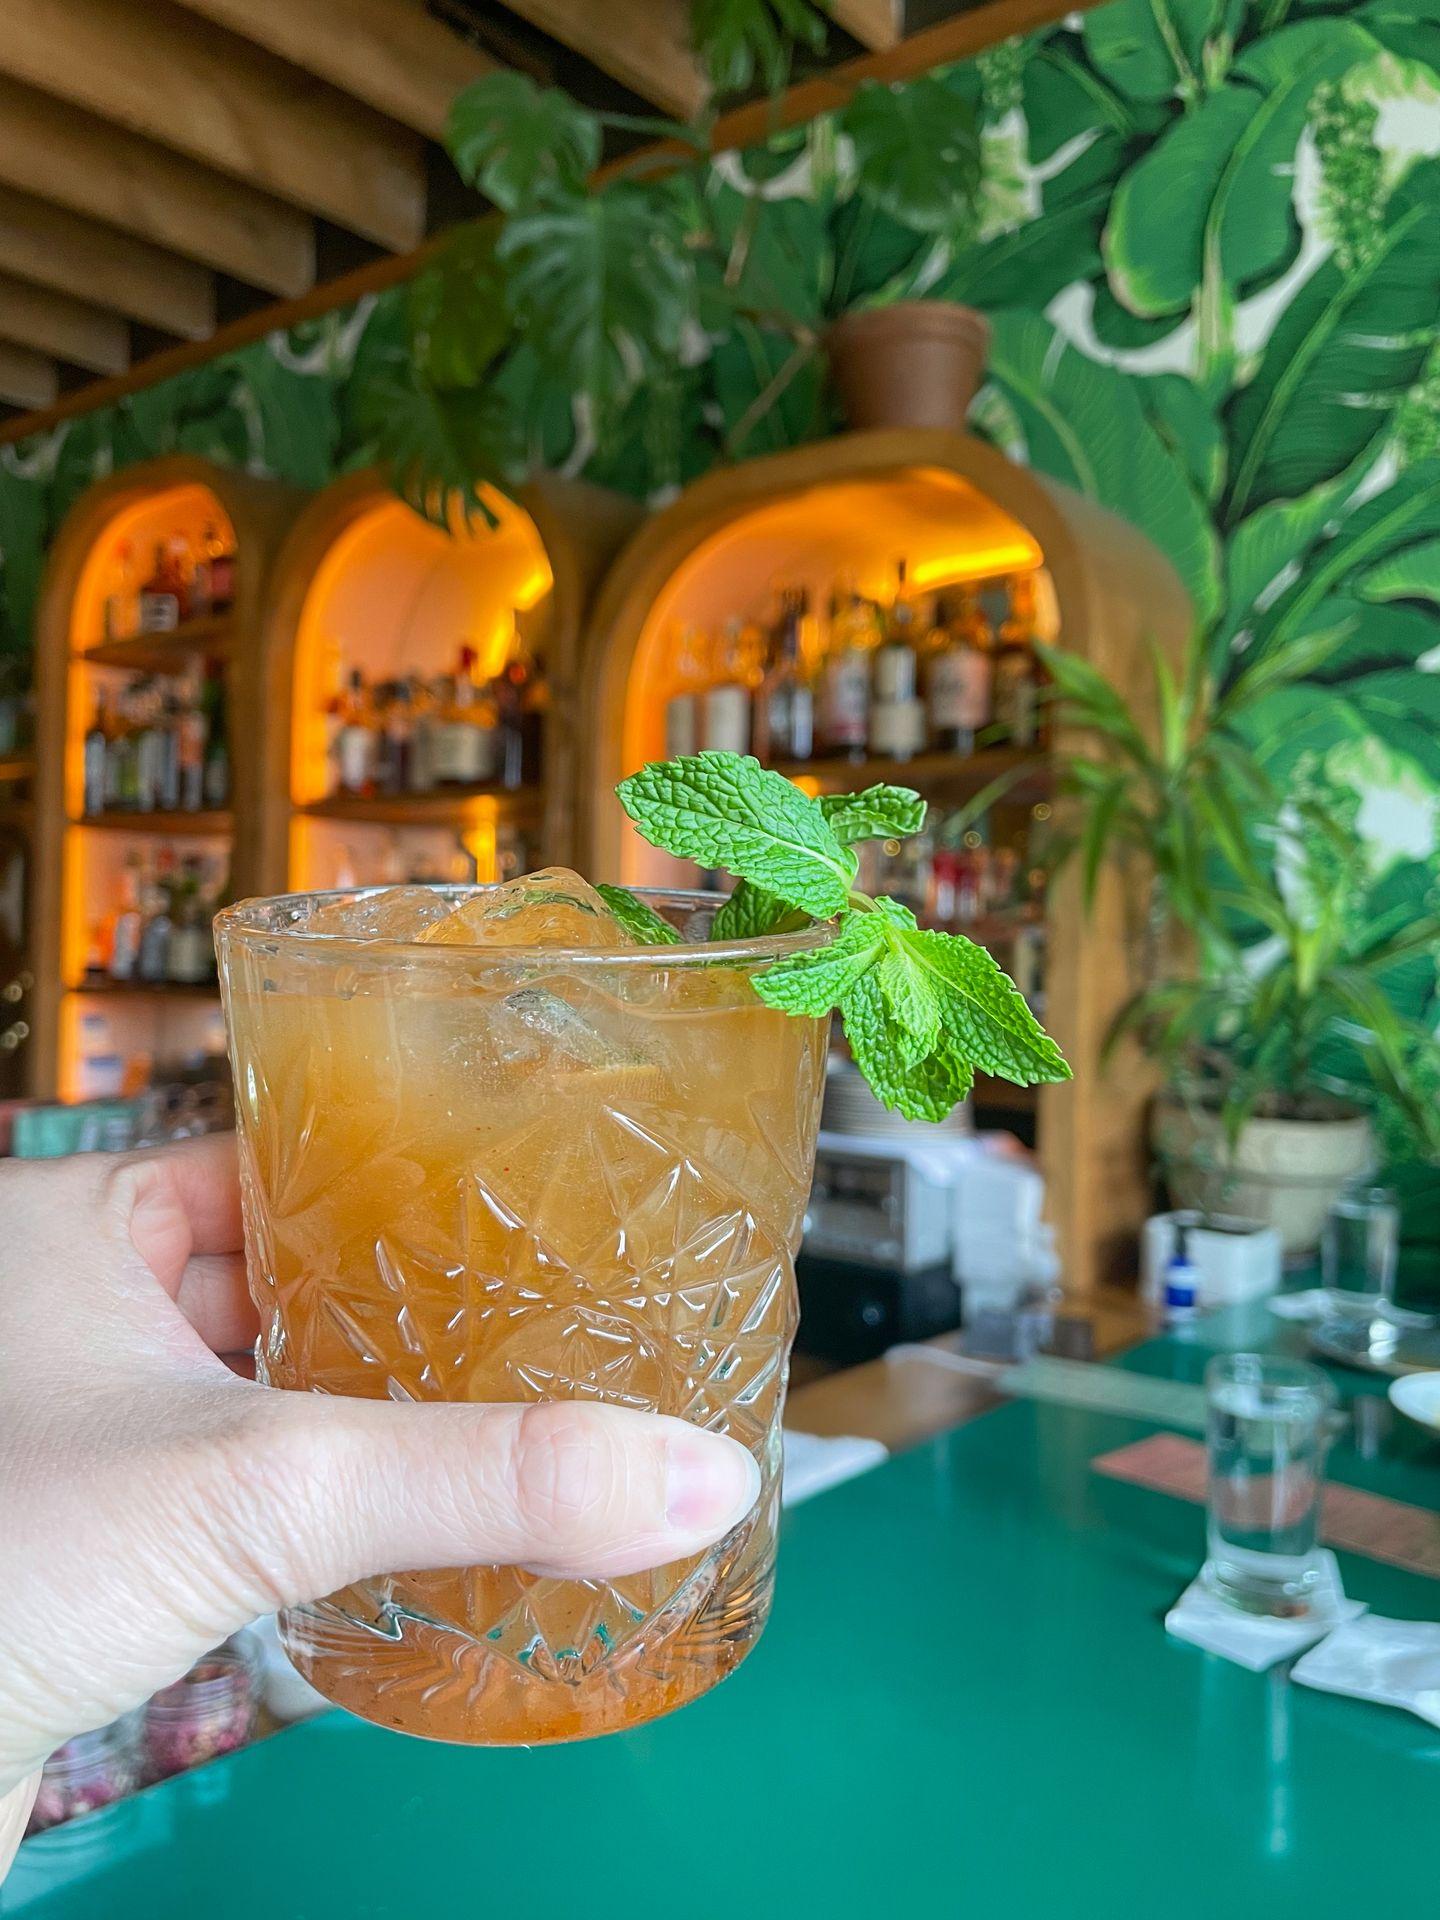 Holding up a cocktail at the bar at Mint Mark. The walls behind the bar are decorated to look like greenery.